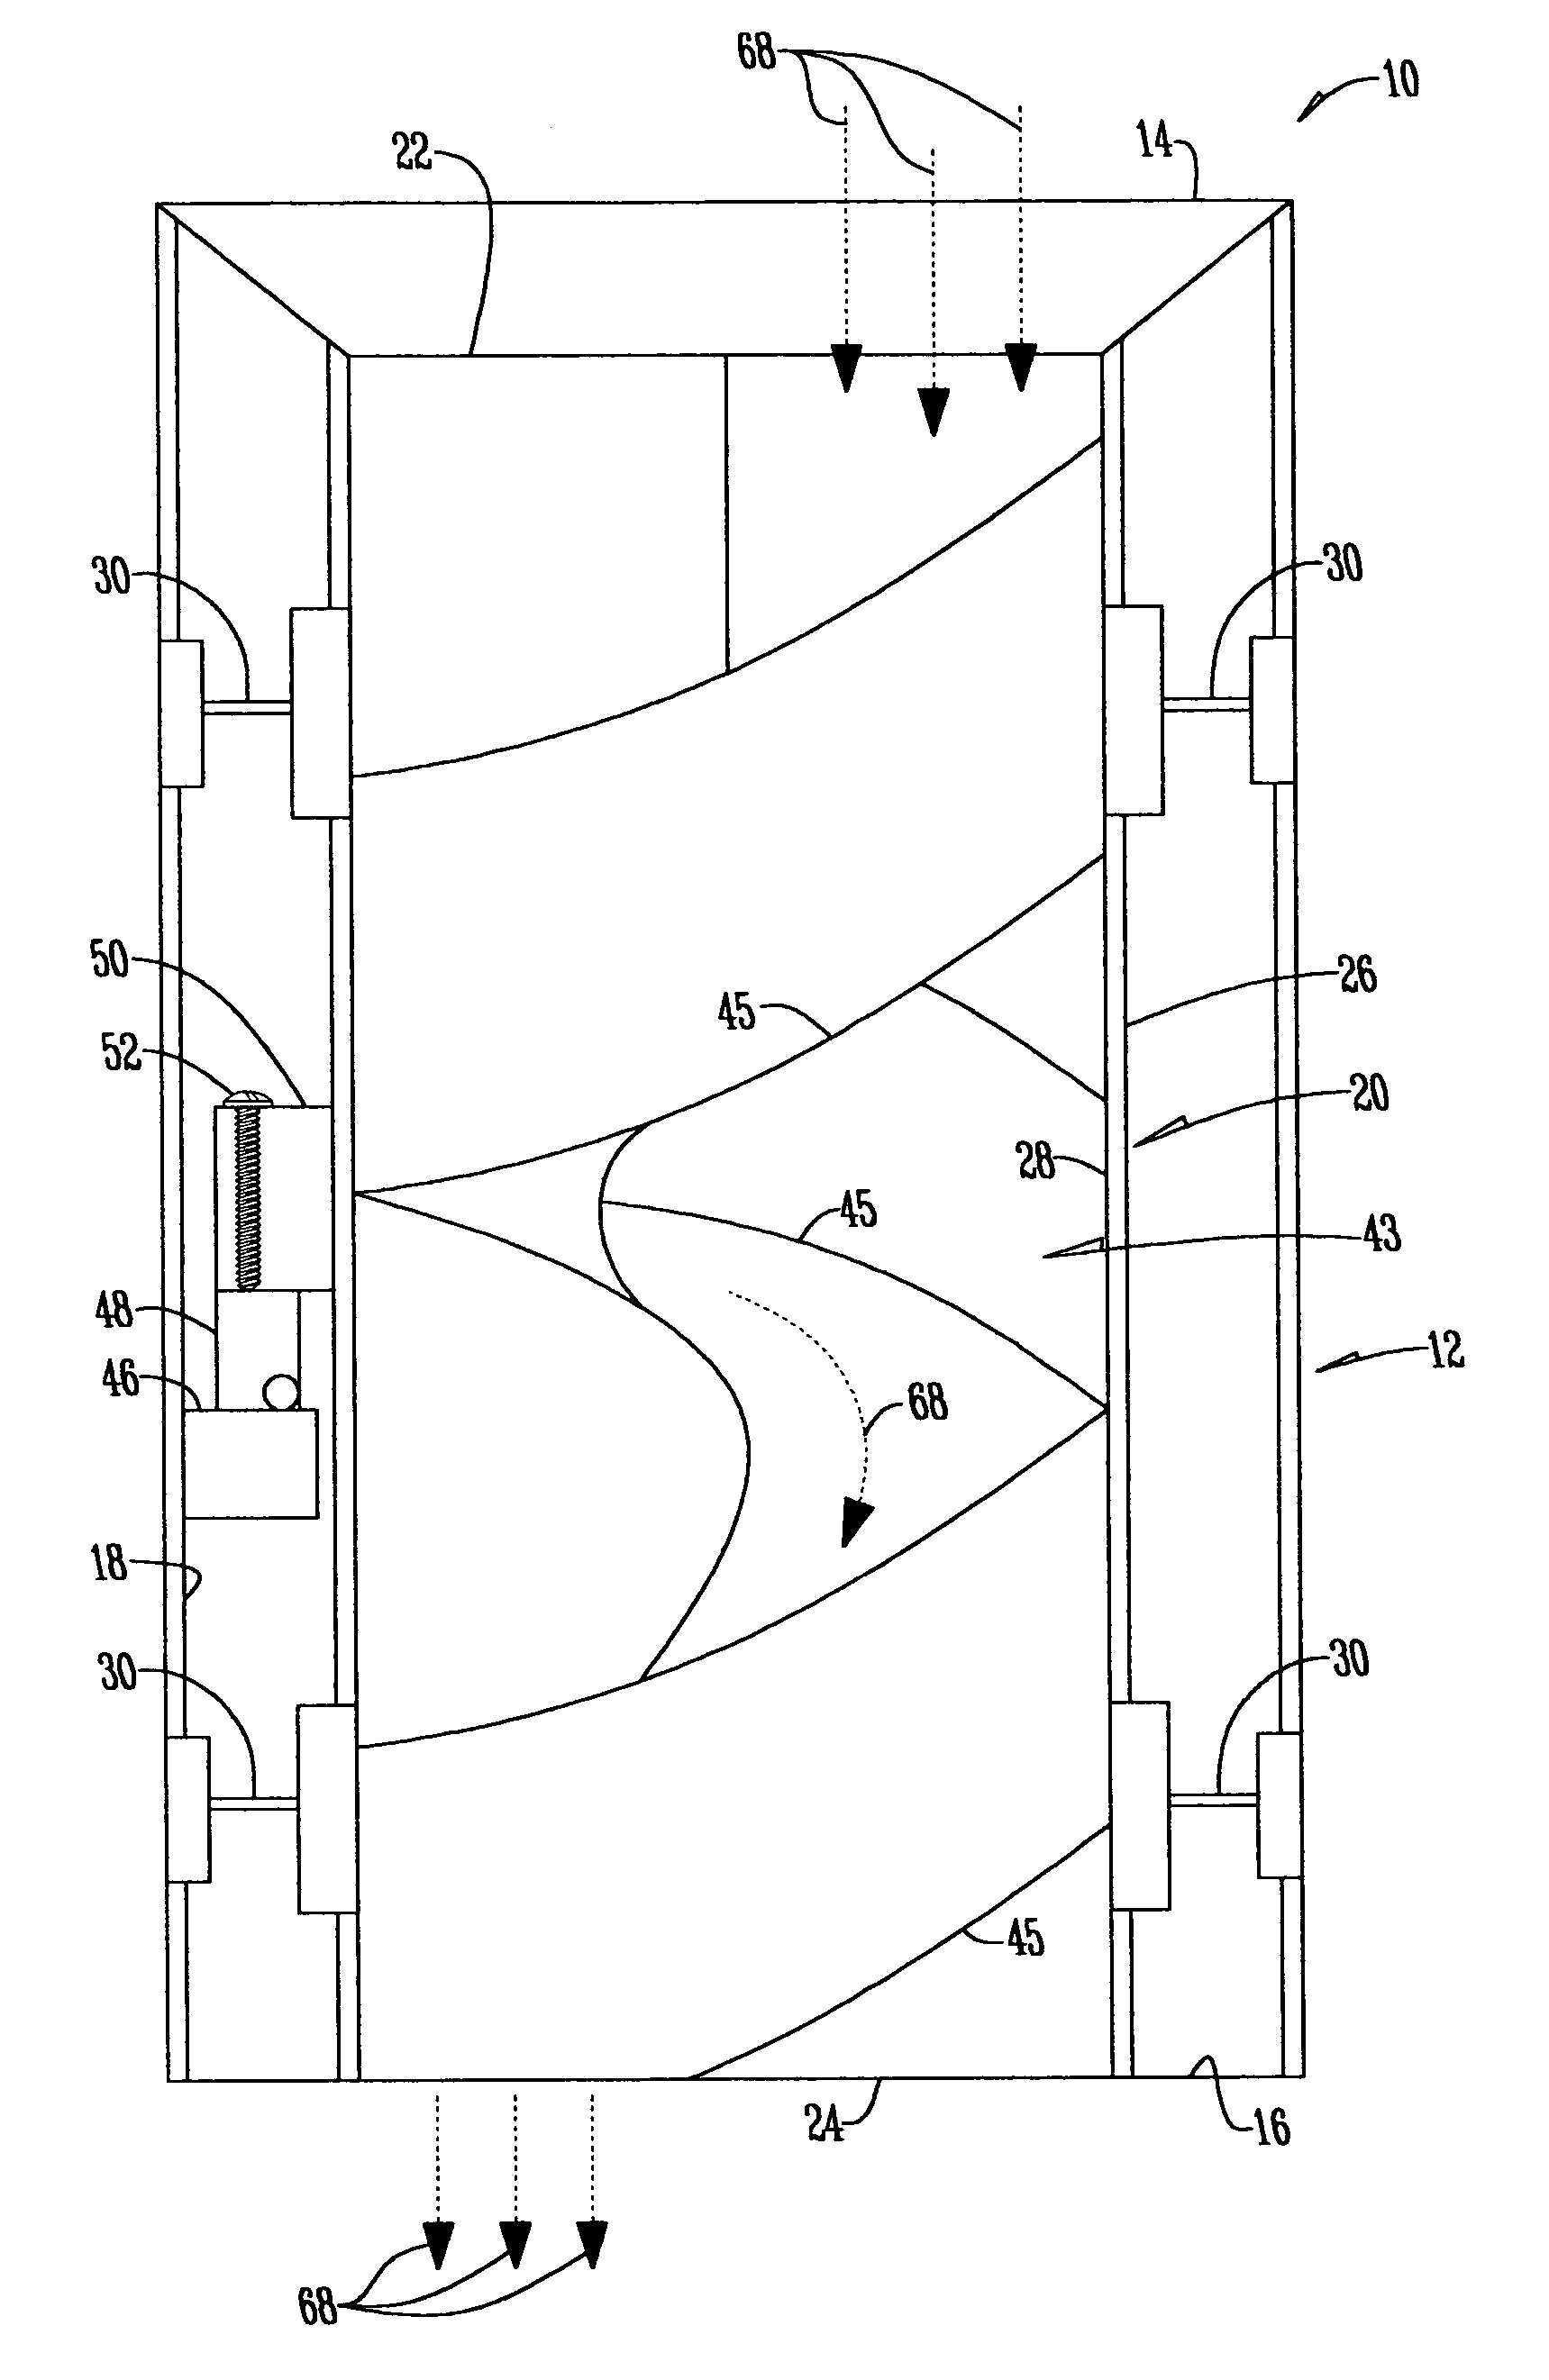 Method of measuring flow rate of flowable material under continuous flow conditions, and an in-line continuous flow meter